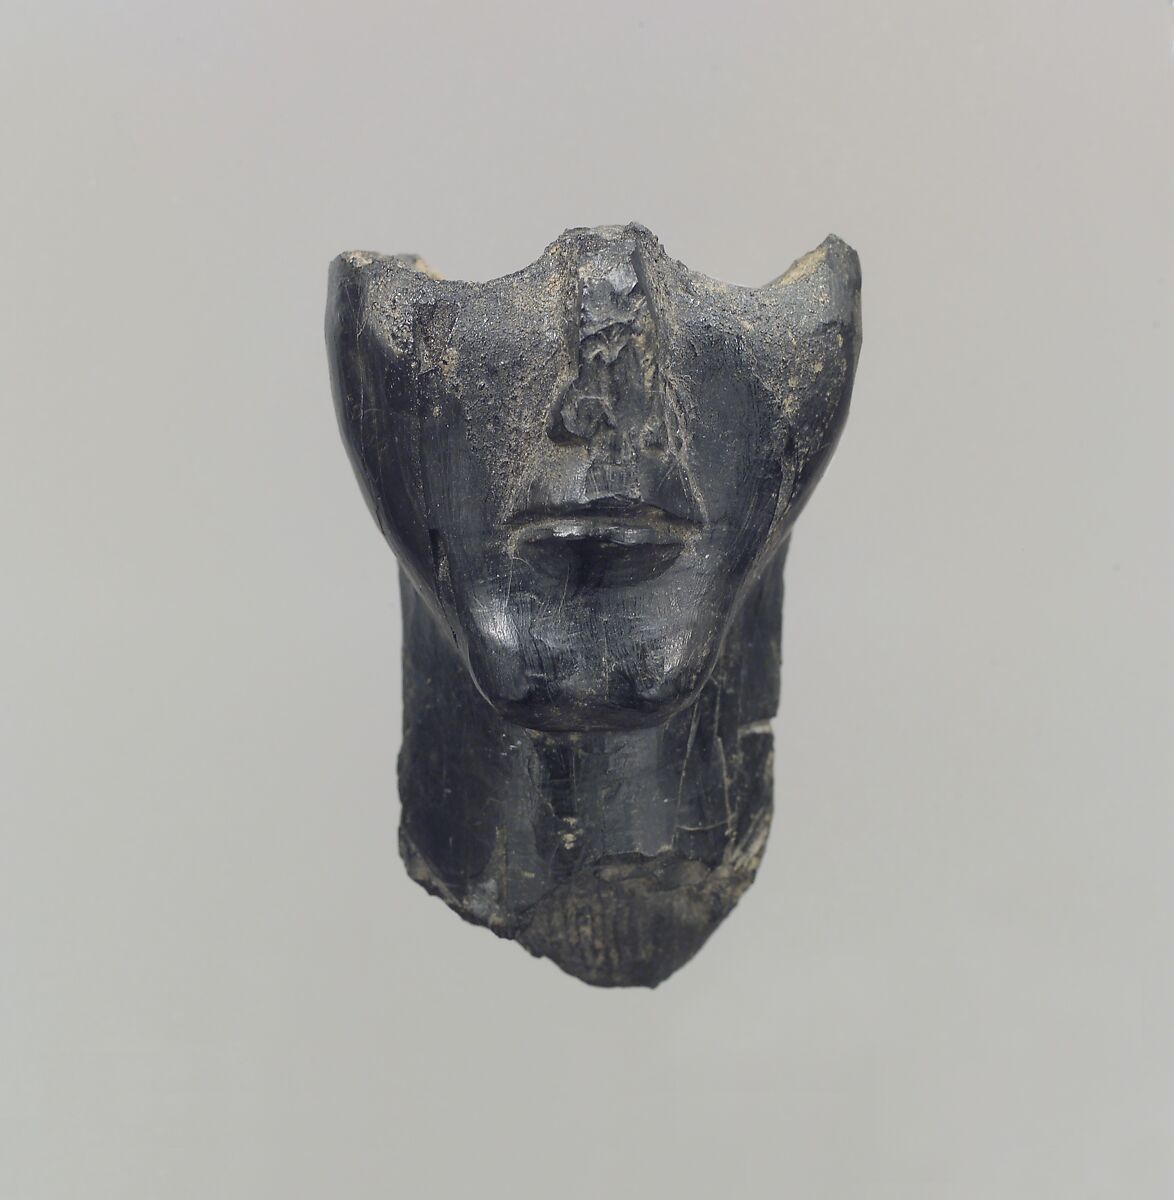 Lower half of a human head in the round, Ivory, Iran